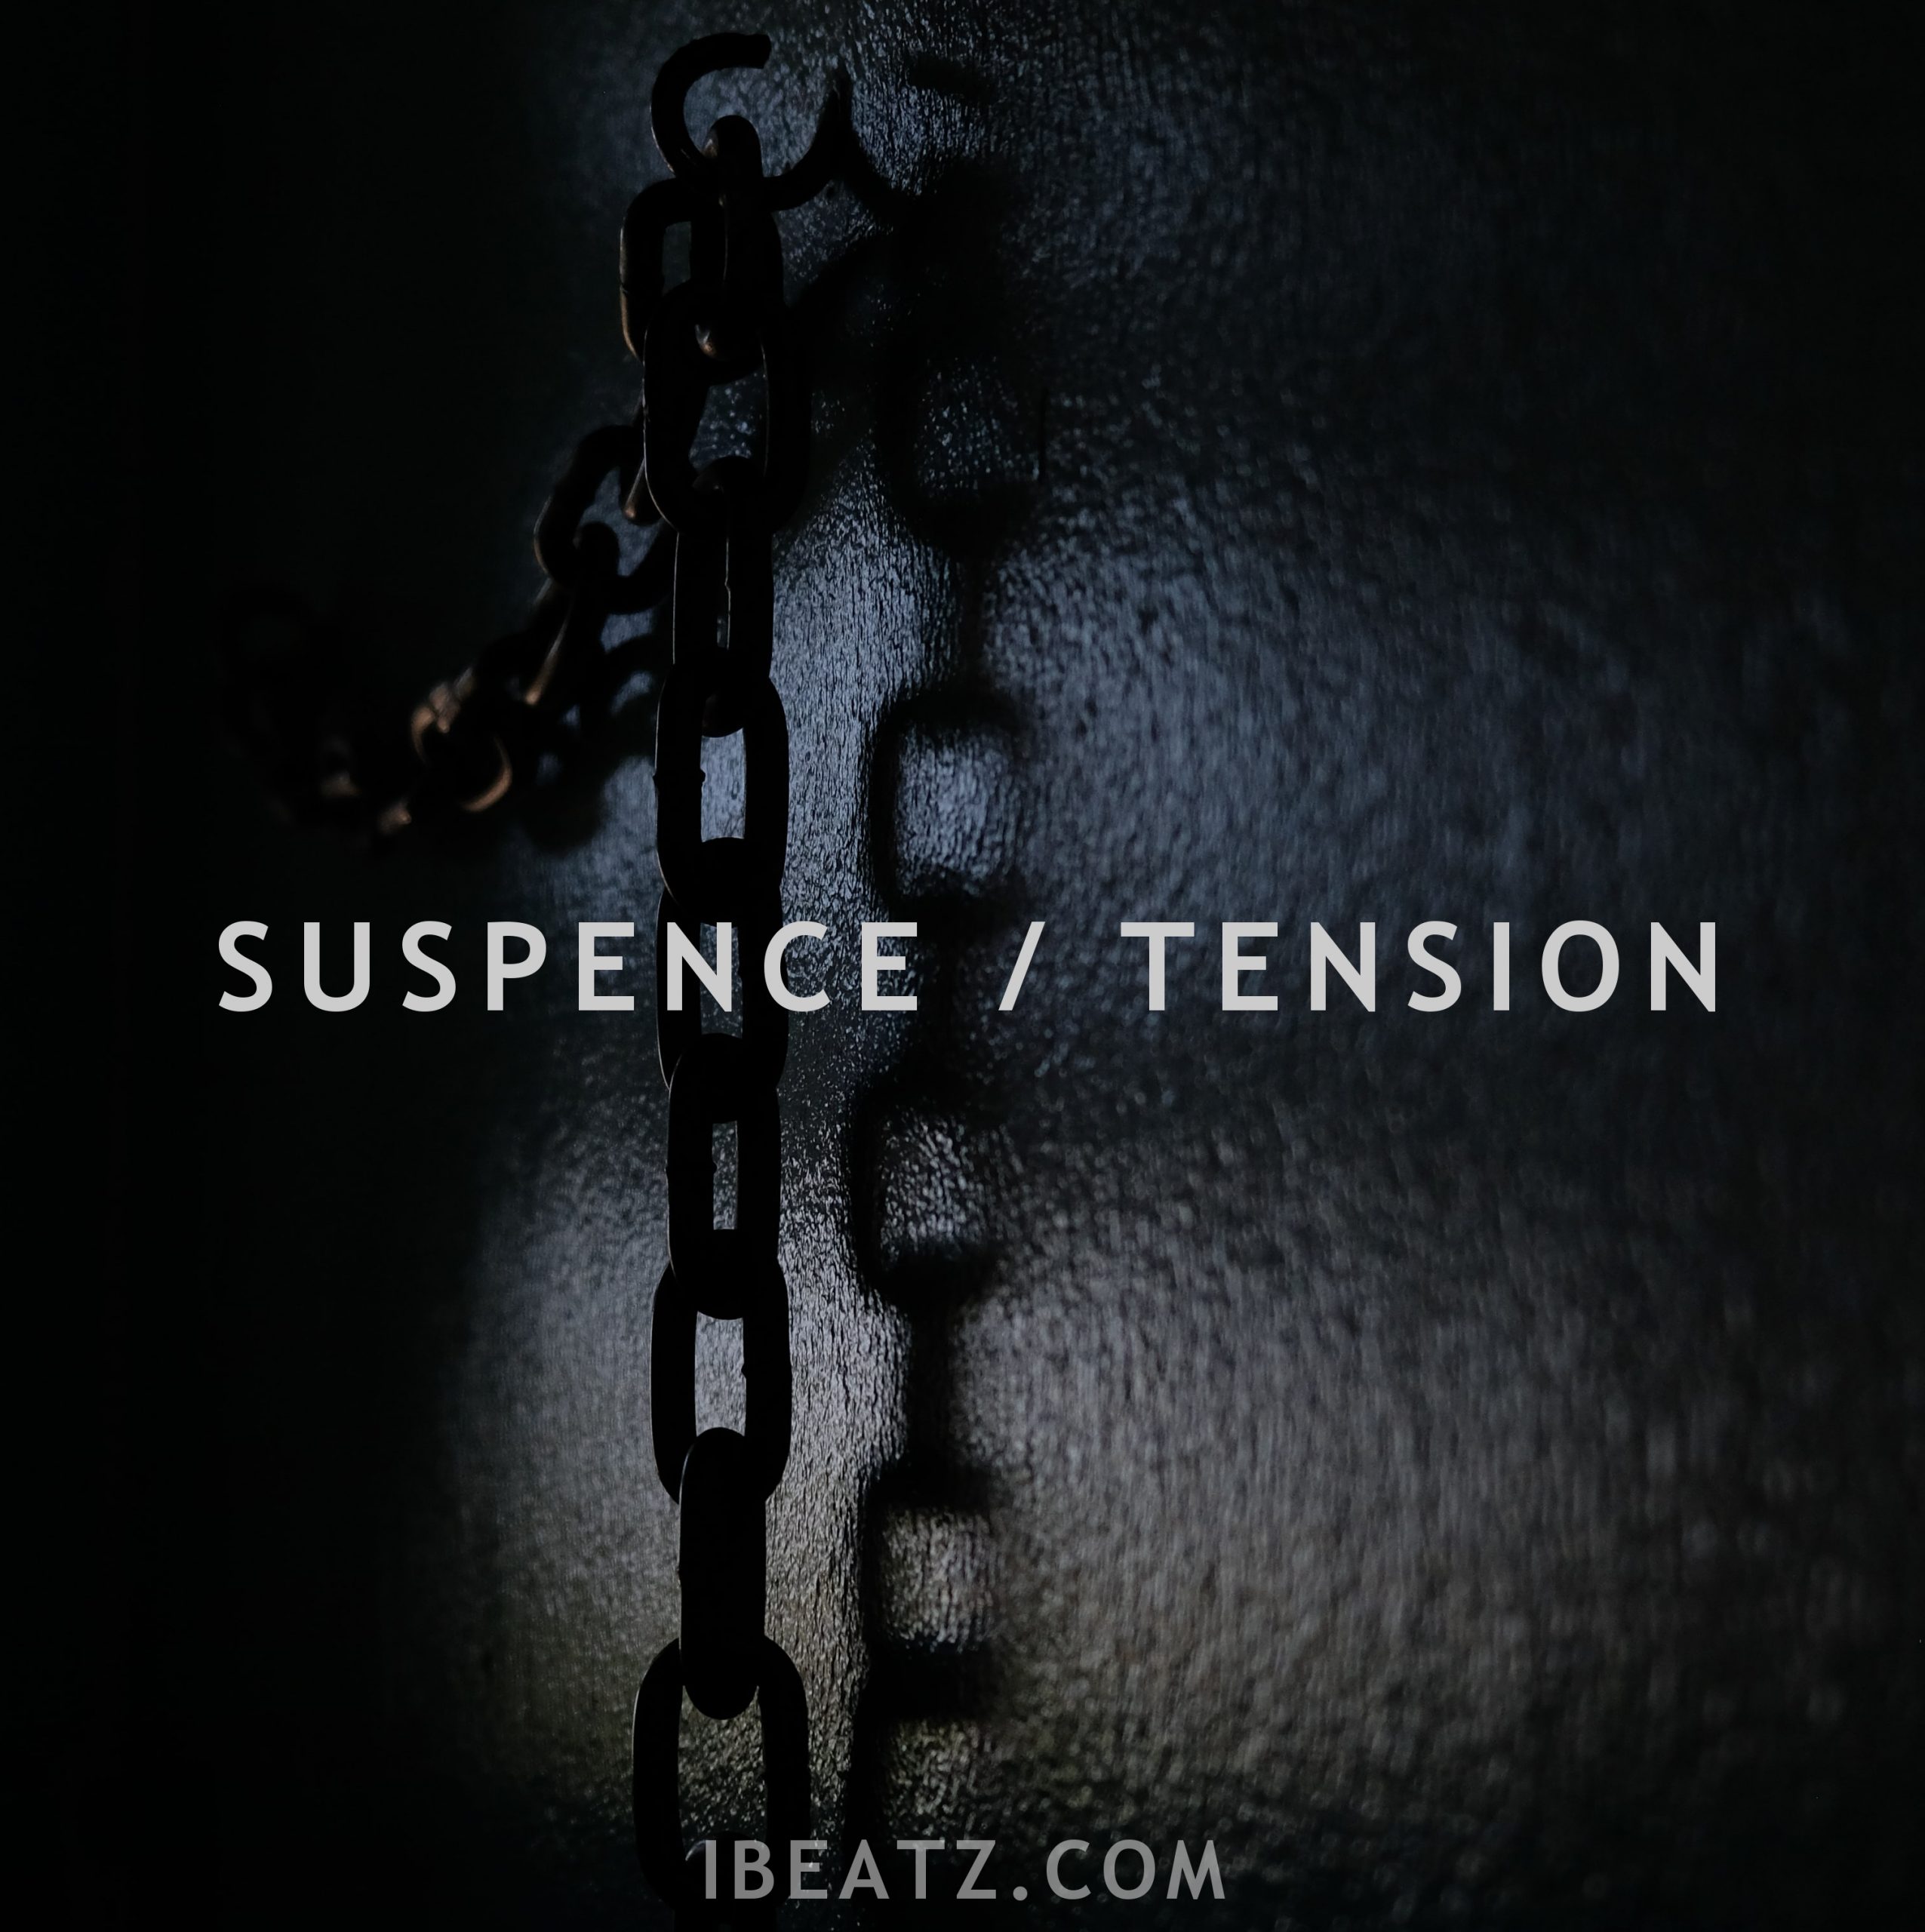 SUSPENCE / TENSION